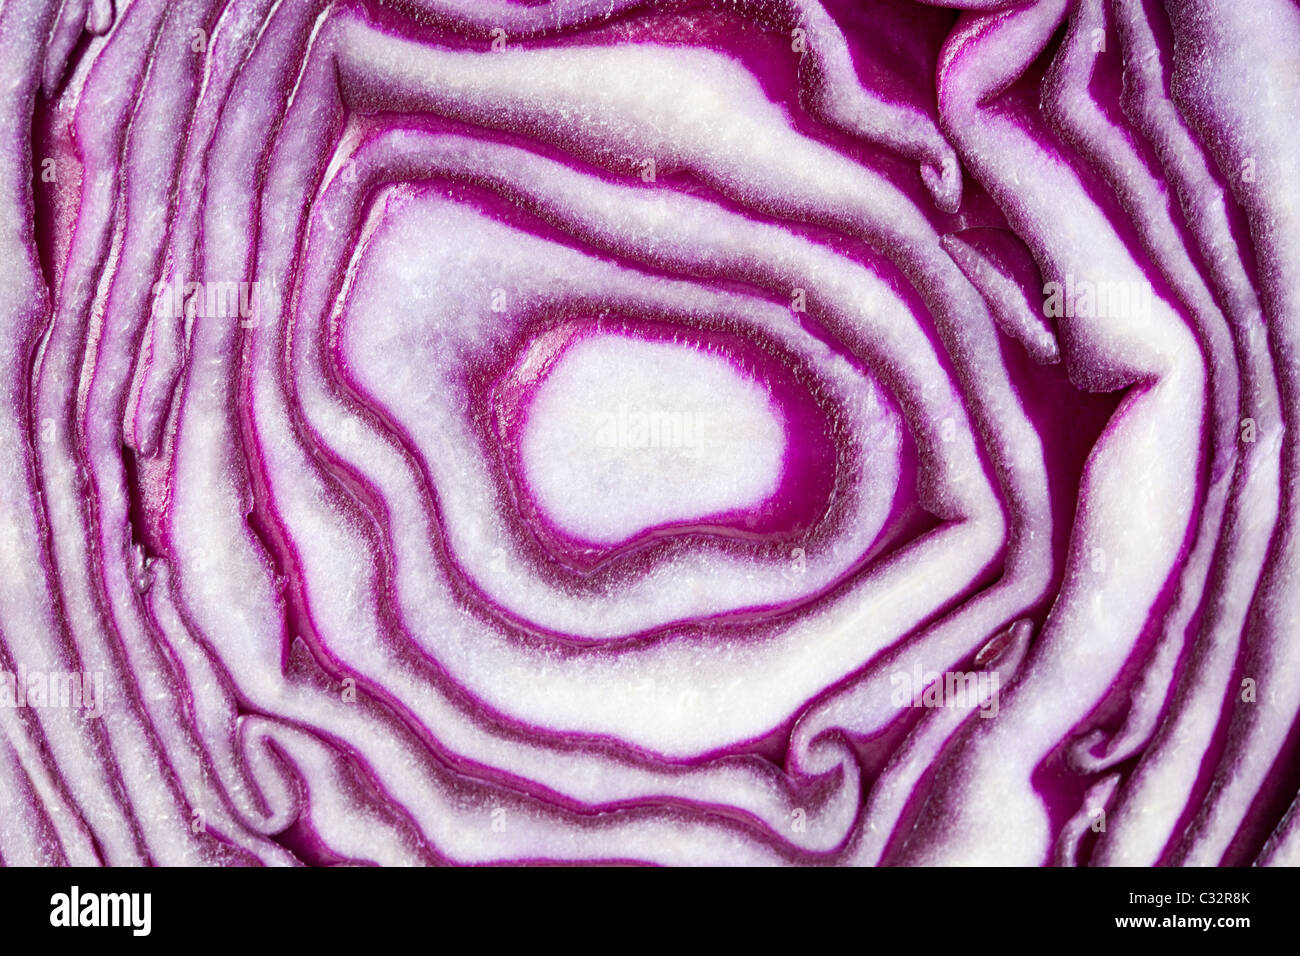 Sliced red cabbage, close up Stock Photo